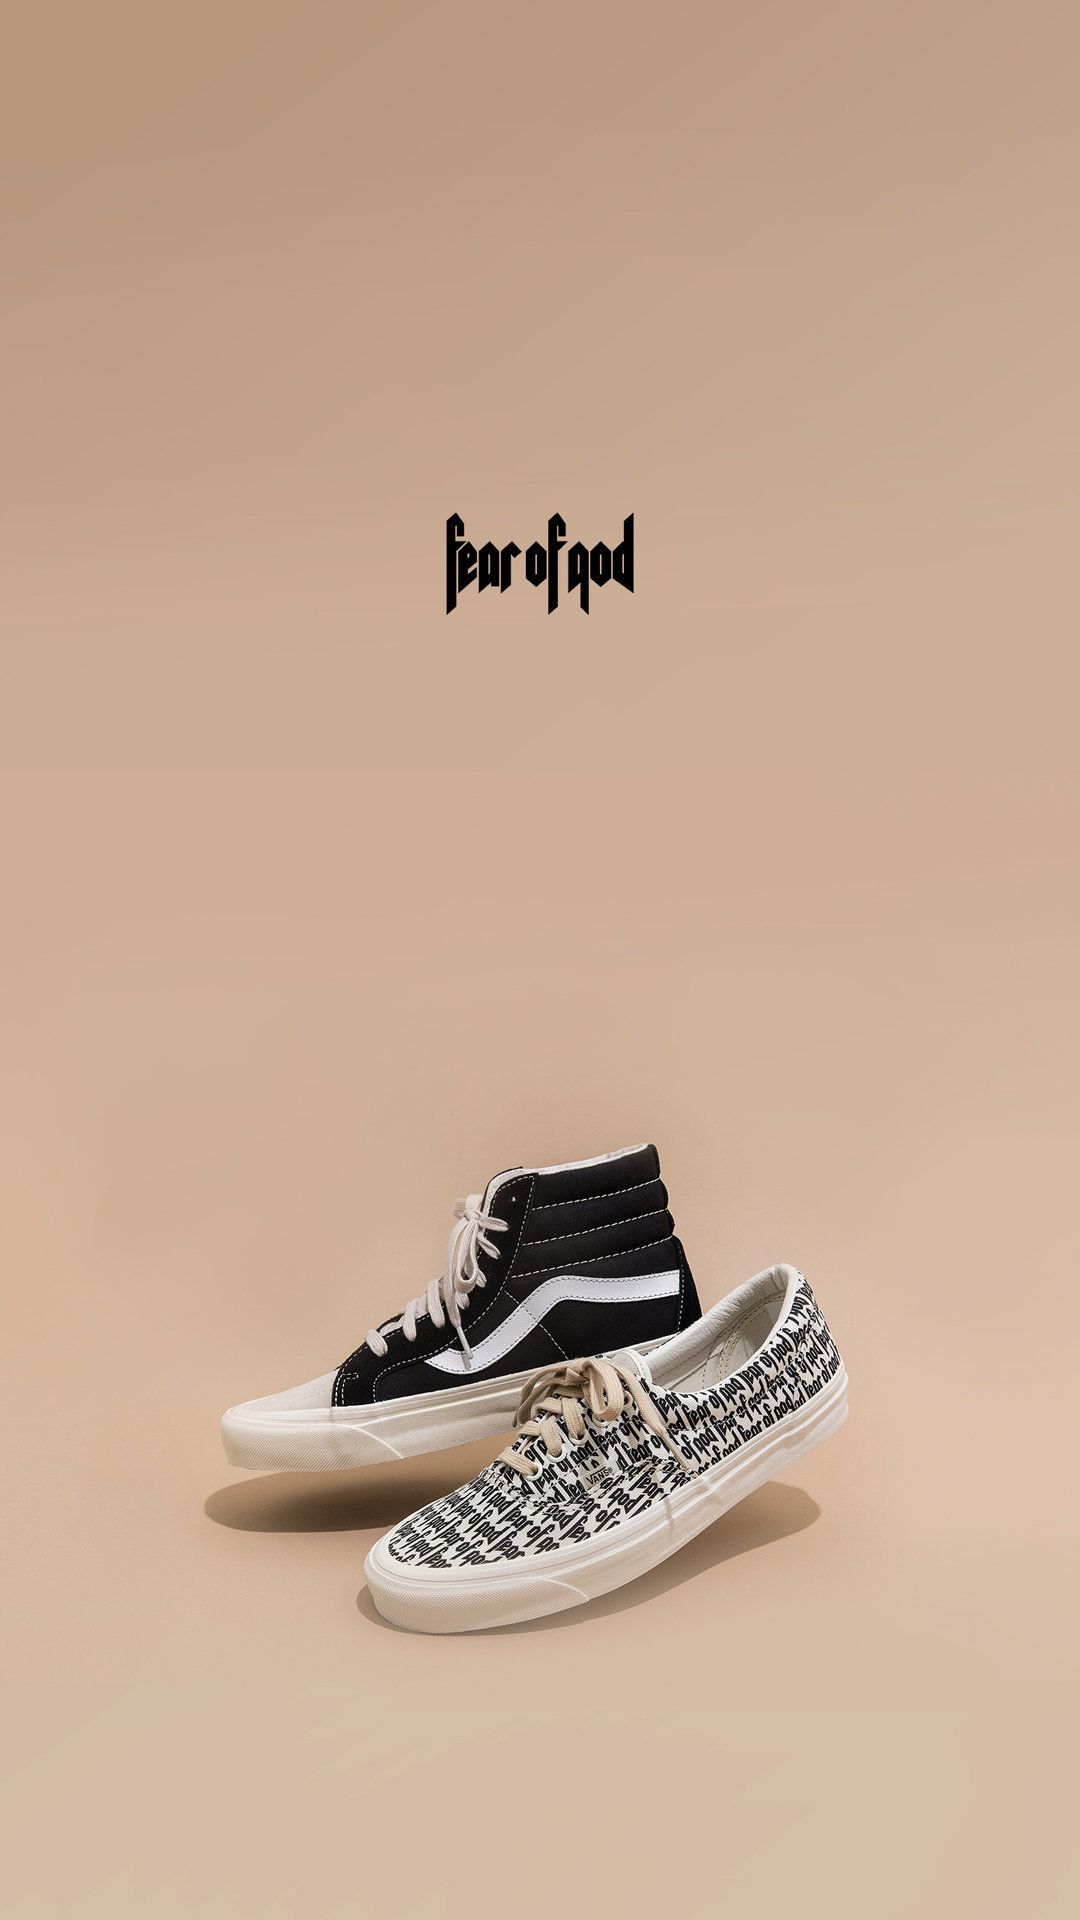 Fear of God iPhone Wallpapers on WallpaperDog